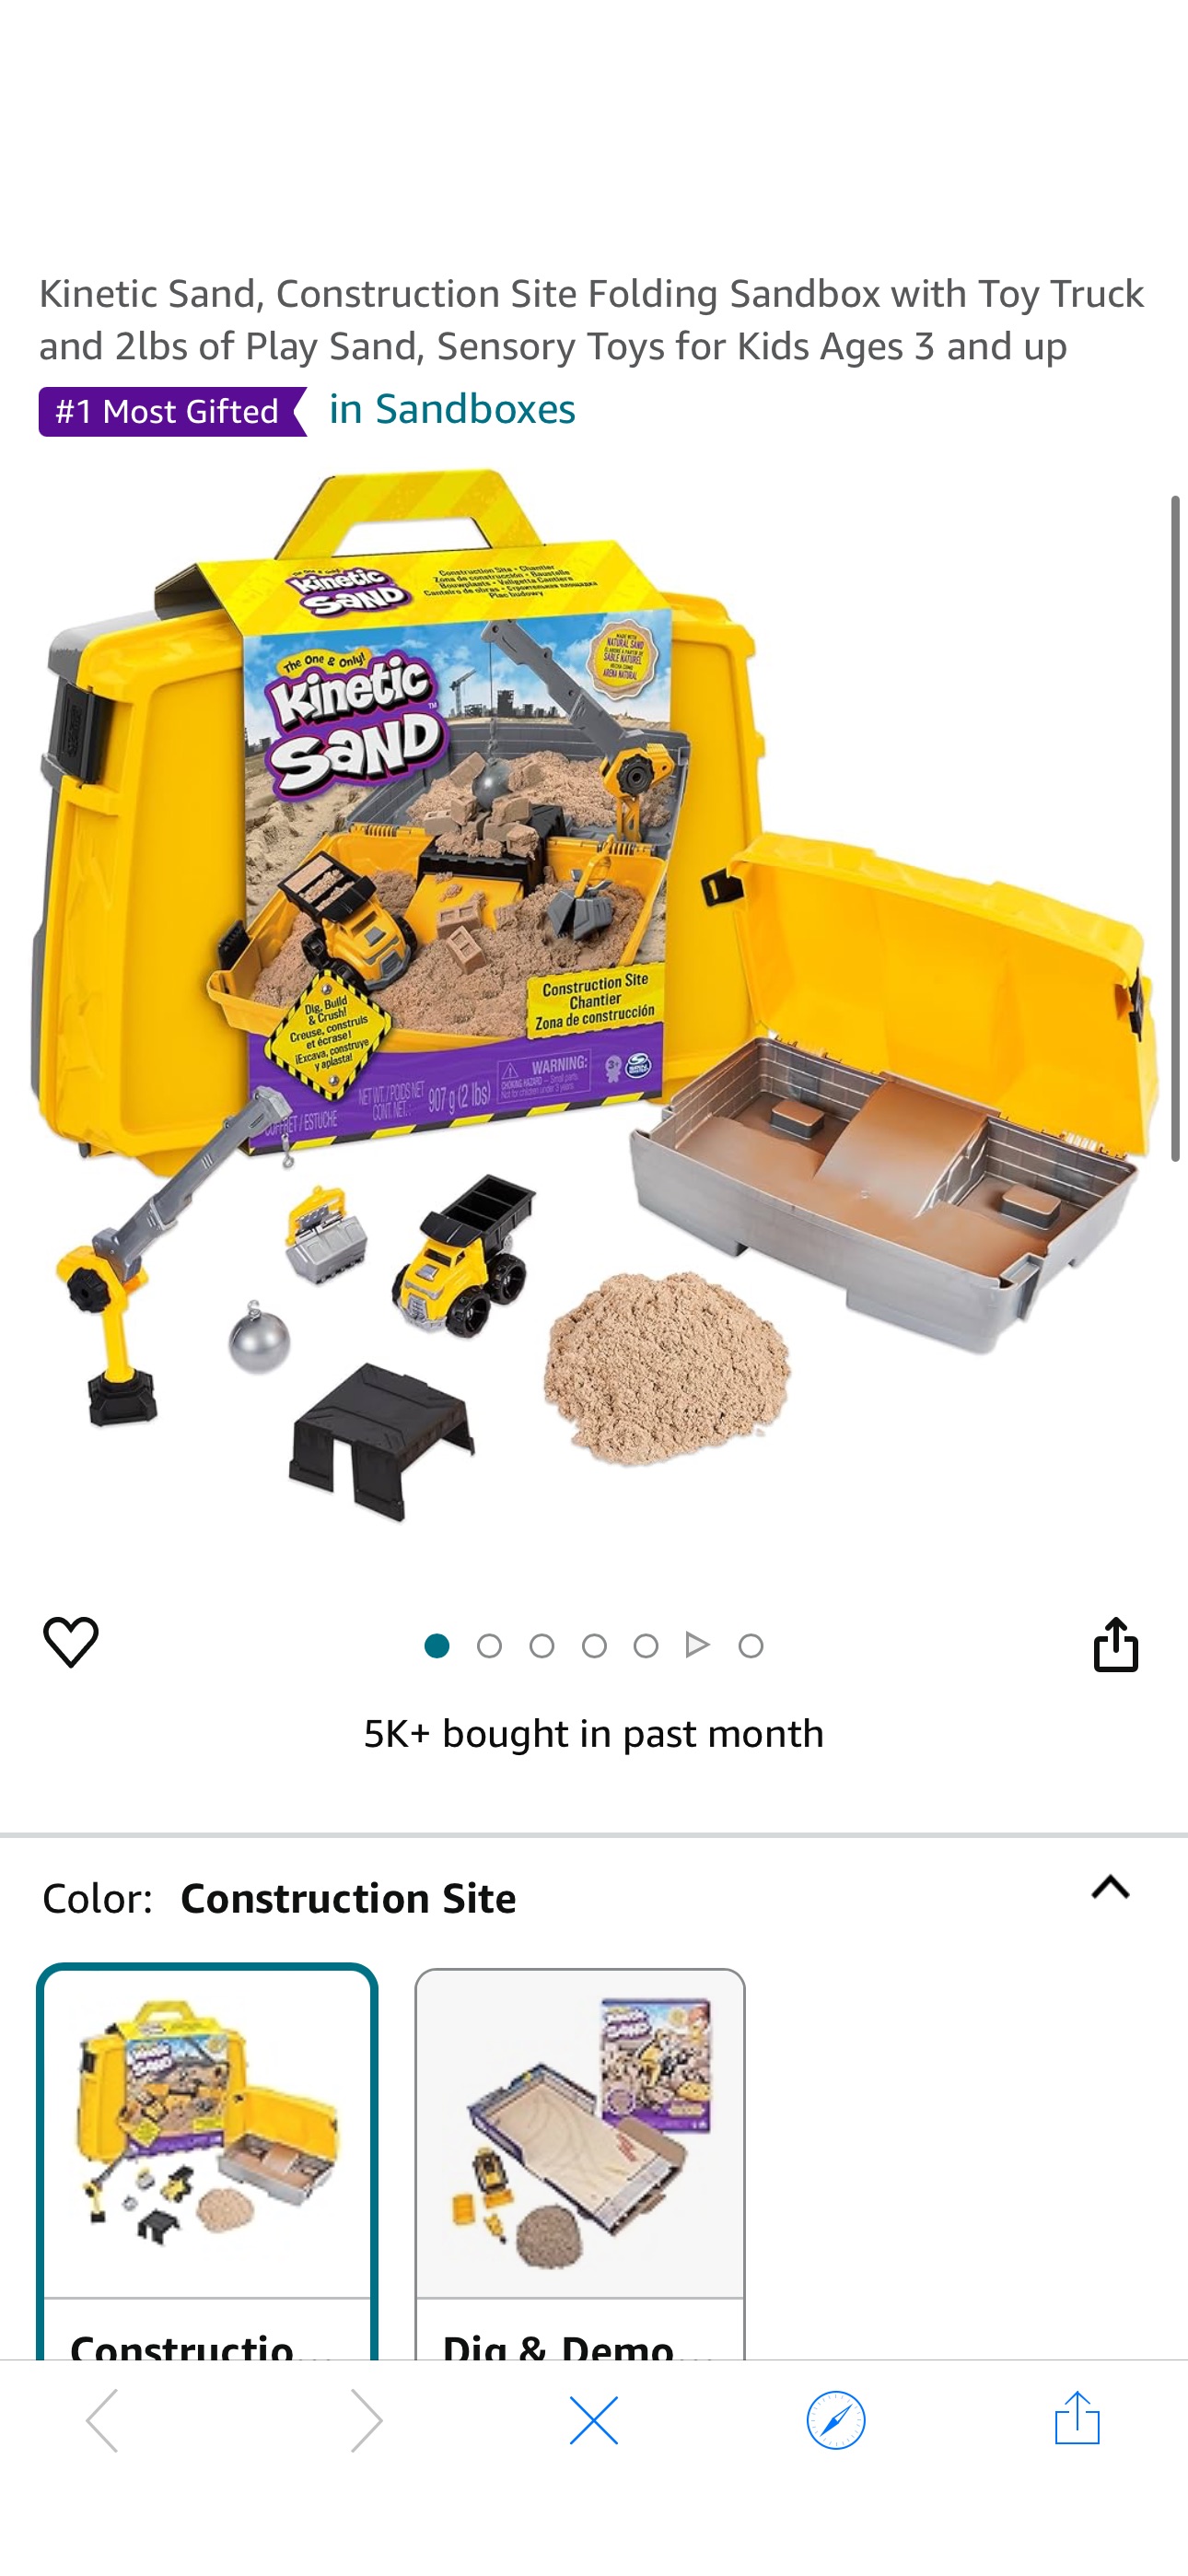 Amazon.com: Kinetic Sand, Construction Site Folding Sandbox with Toy Truck and 2lbs of Play Sand, Sensory Toys for Kids Ages 3 and up : Toys & Games